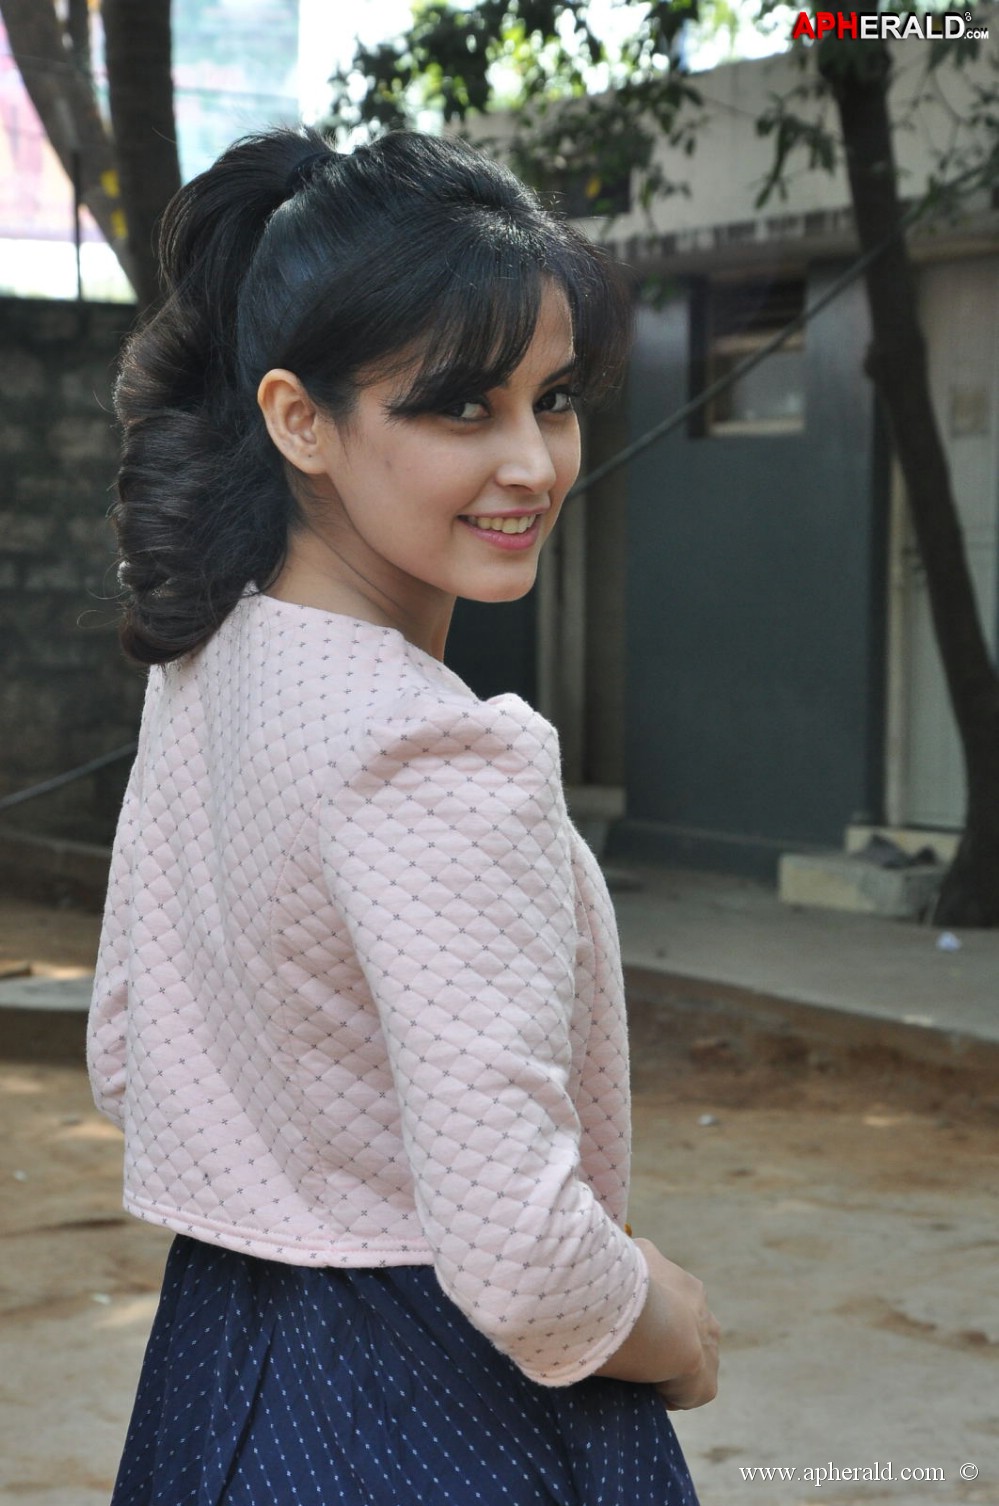 Disha pandey hot pictures